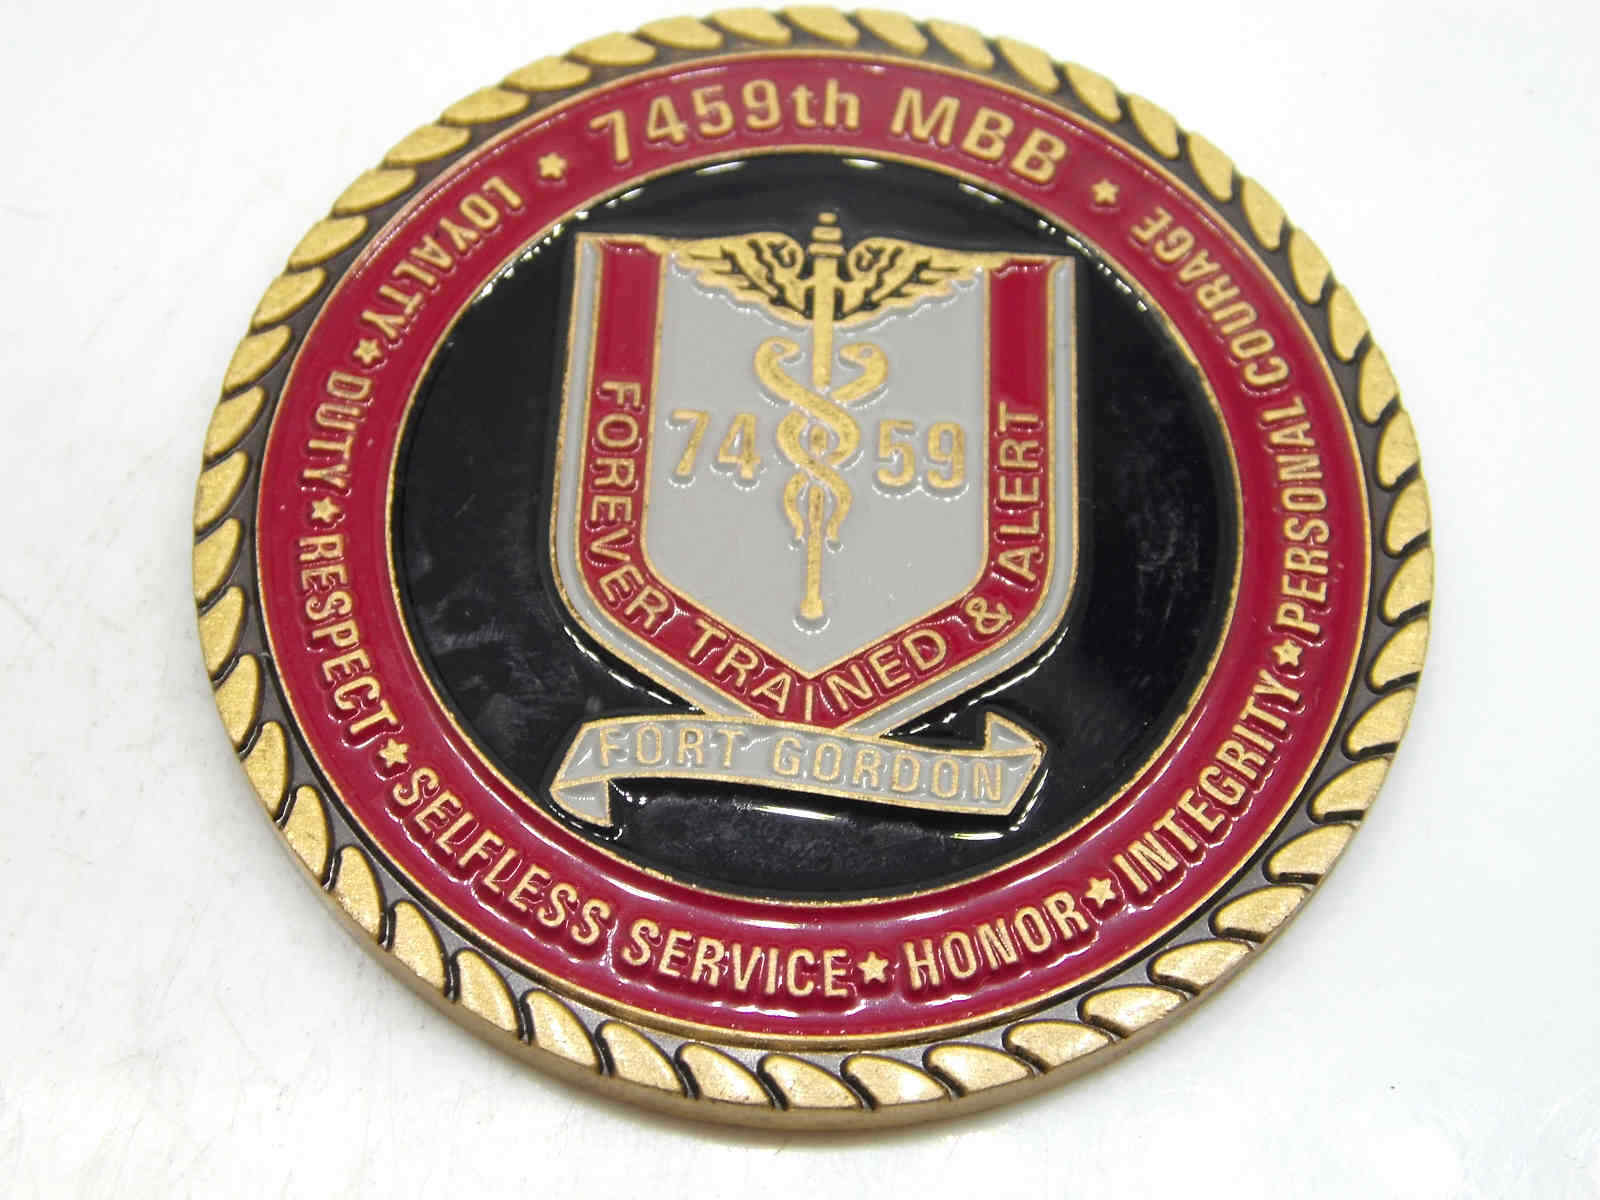 7459TH MBB OUTSTANDING PERFORMANCE CHALLENGE COIN